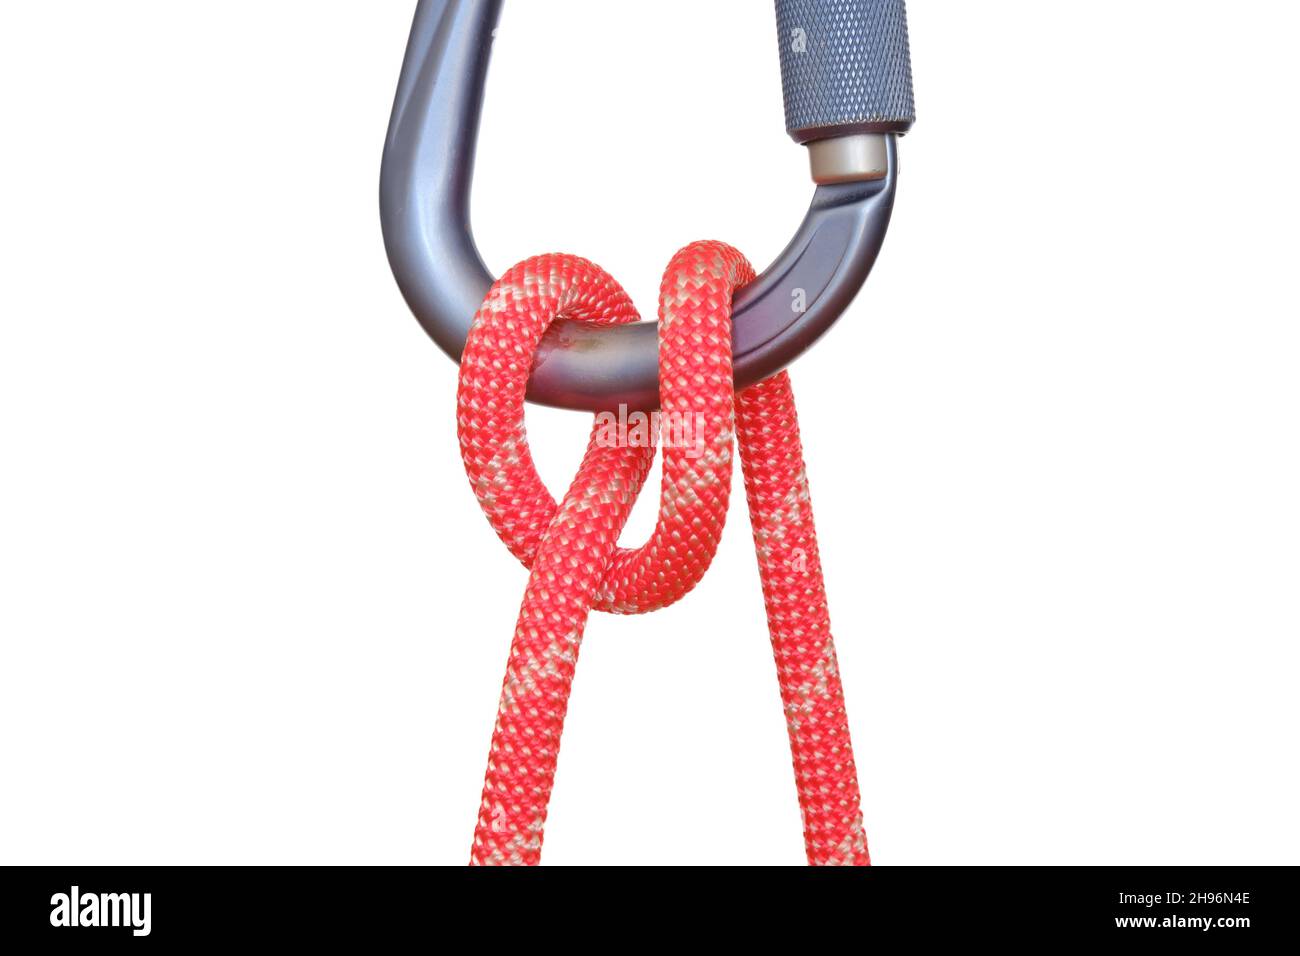 Munter hitch tied with red rope on carabiner, isolated on white background.  This adjustable knot used in climbing is also called the Italian hitch, Me  Stock Photo - Alamy